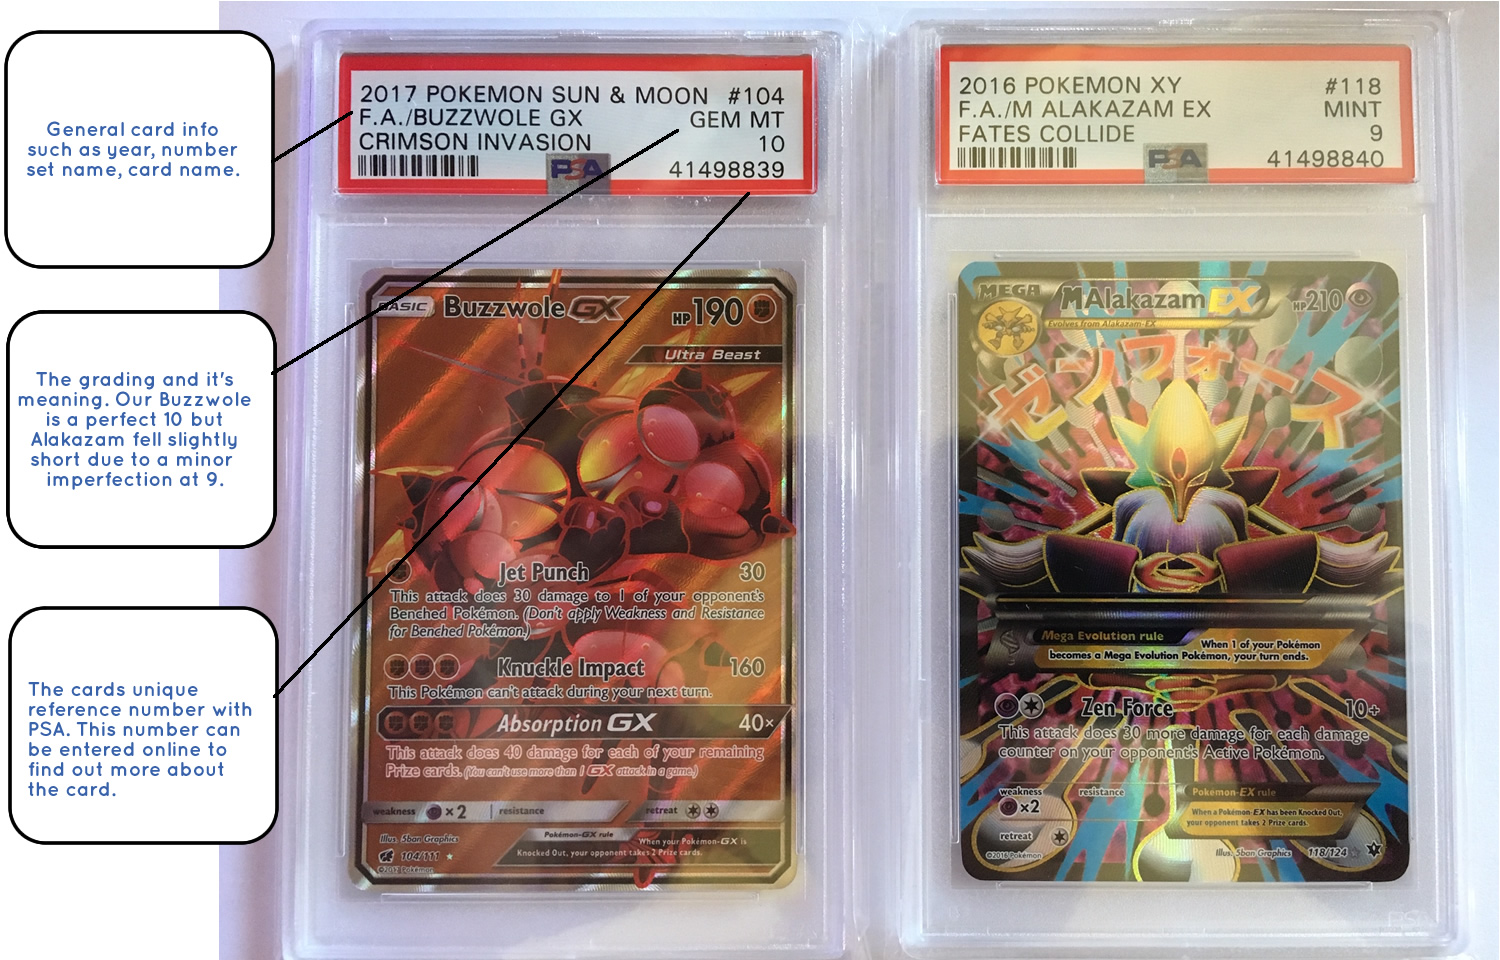 Examples of Graded Pokemon Cards and what the PSA info means.